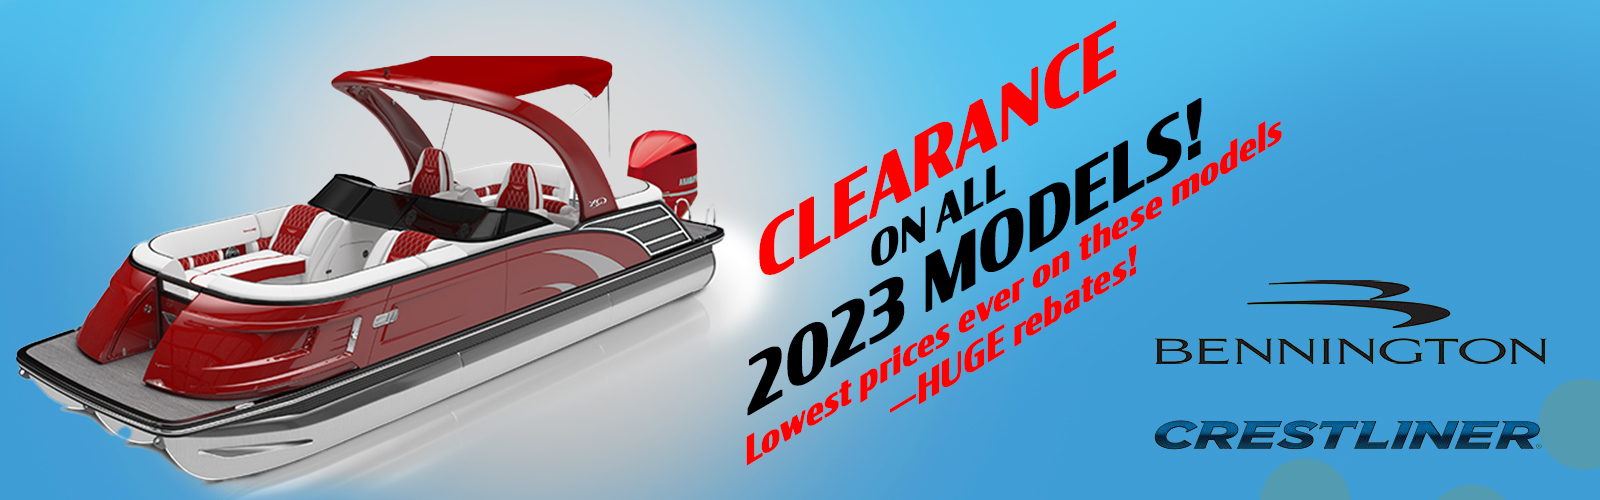 Clearance V2 Banner 1600x500